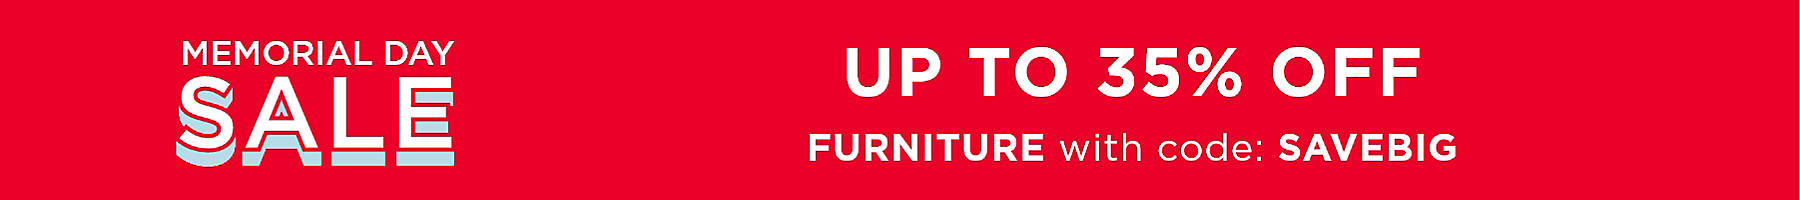 memorial day sale up to 35% off furniture with code: SAVEBIG